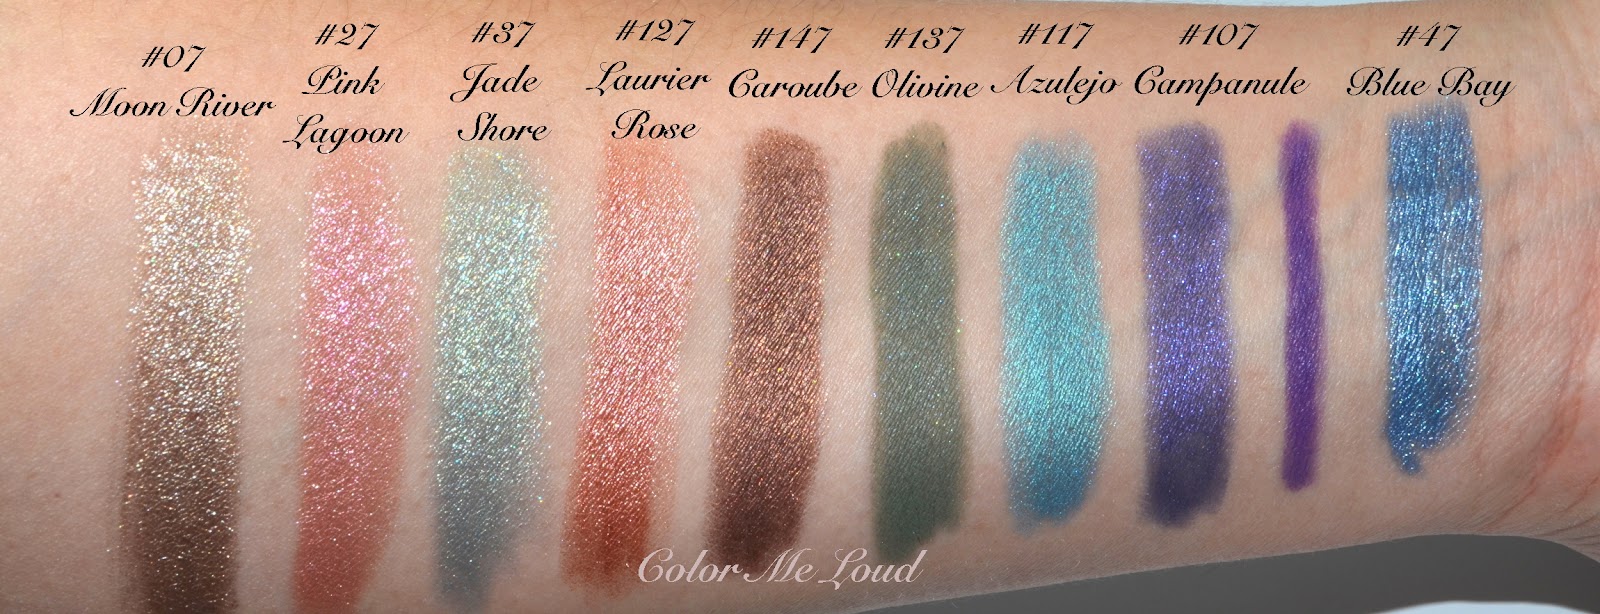 Chanel Stylo Eye Shadow #107 Campanule, #117 Azulejo, #127 Laurier Rose,  #137 Olivine, #147 Caroube and Style Yeux #997 Orchidée, Swatch, Review &  FOTD for Summer 2015 Collection